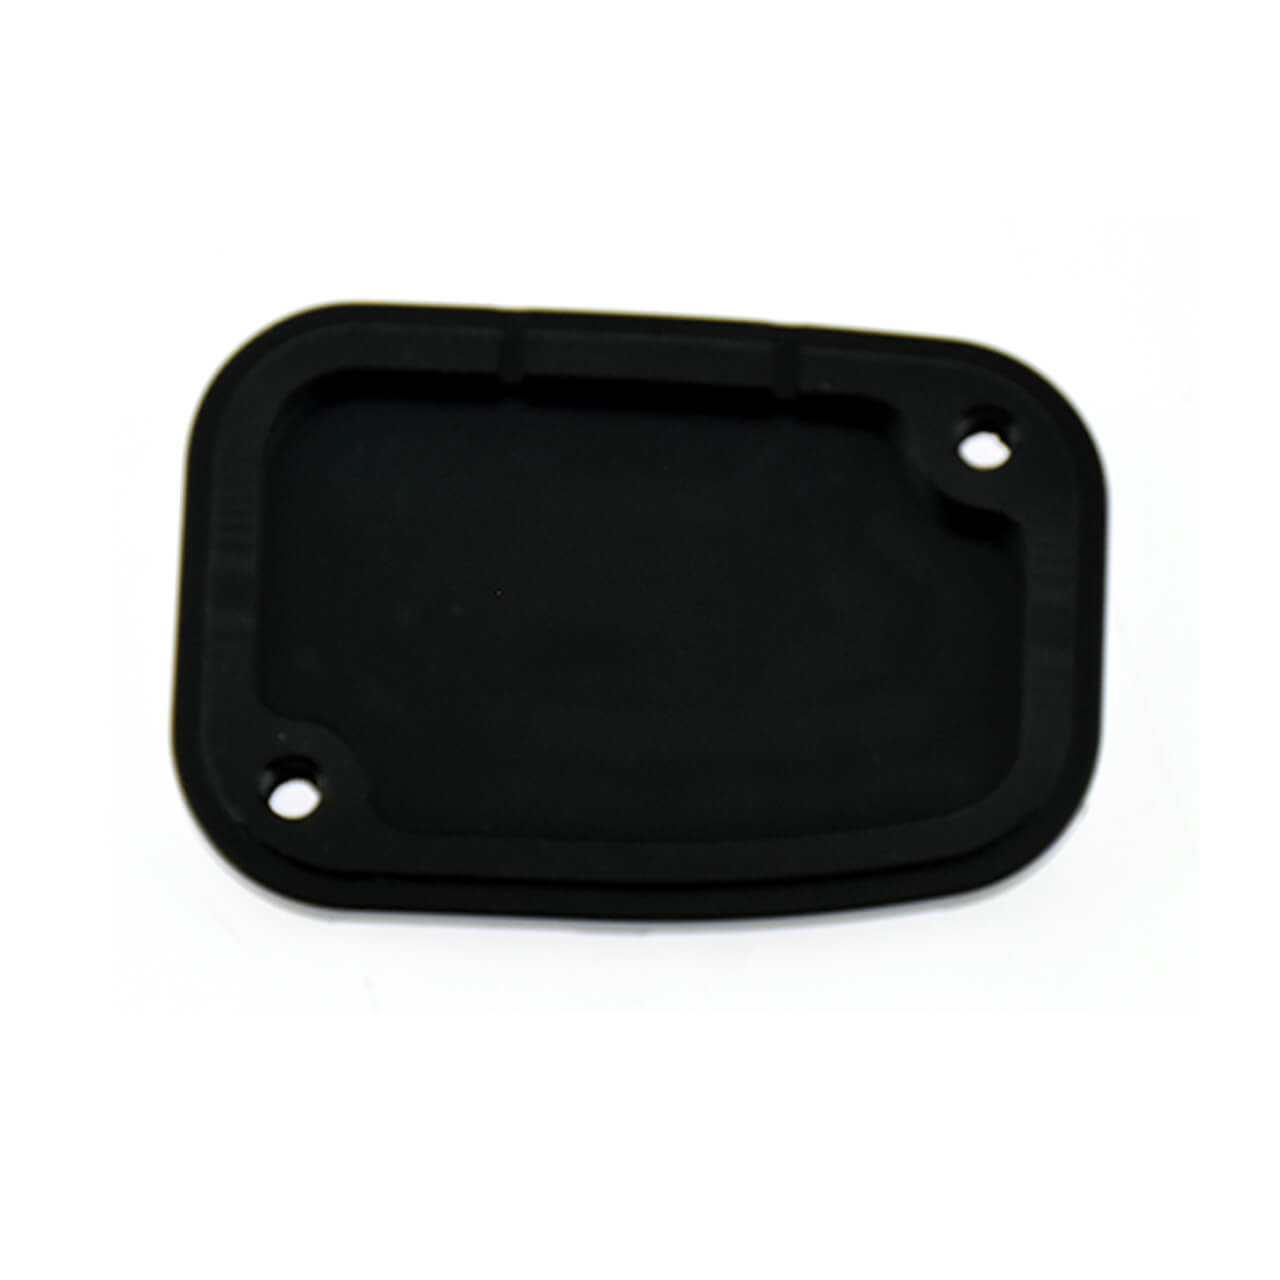 MP0695-mactions-Brake-Master-Cylinder-Cover-For-Harley-touring